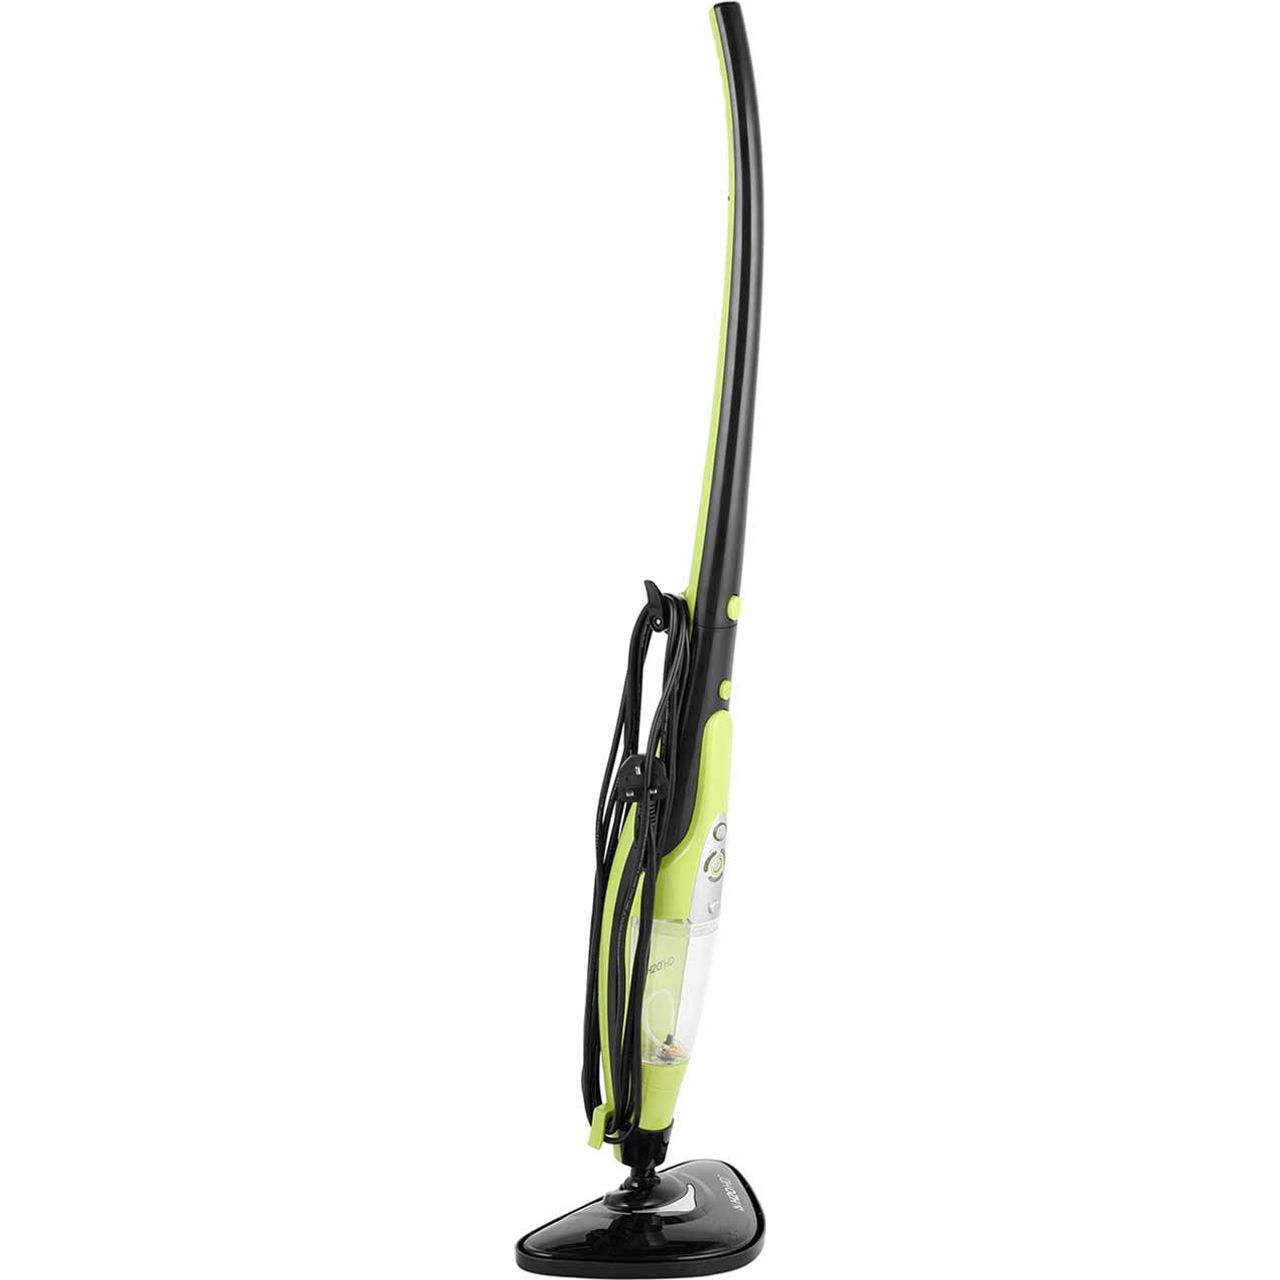 H2O HD 208001UK Steam Mop with up to 15 Minutes Run Time Review